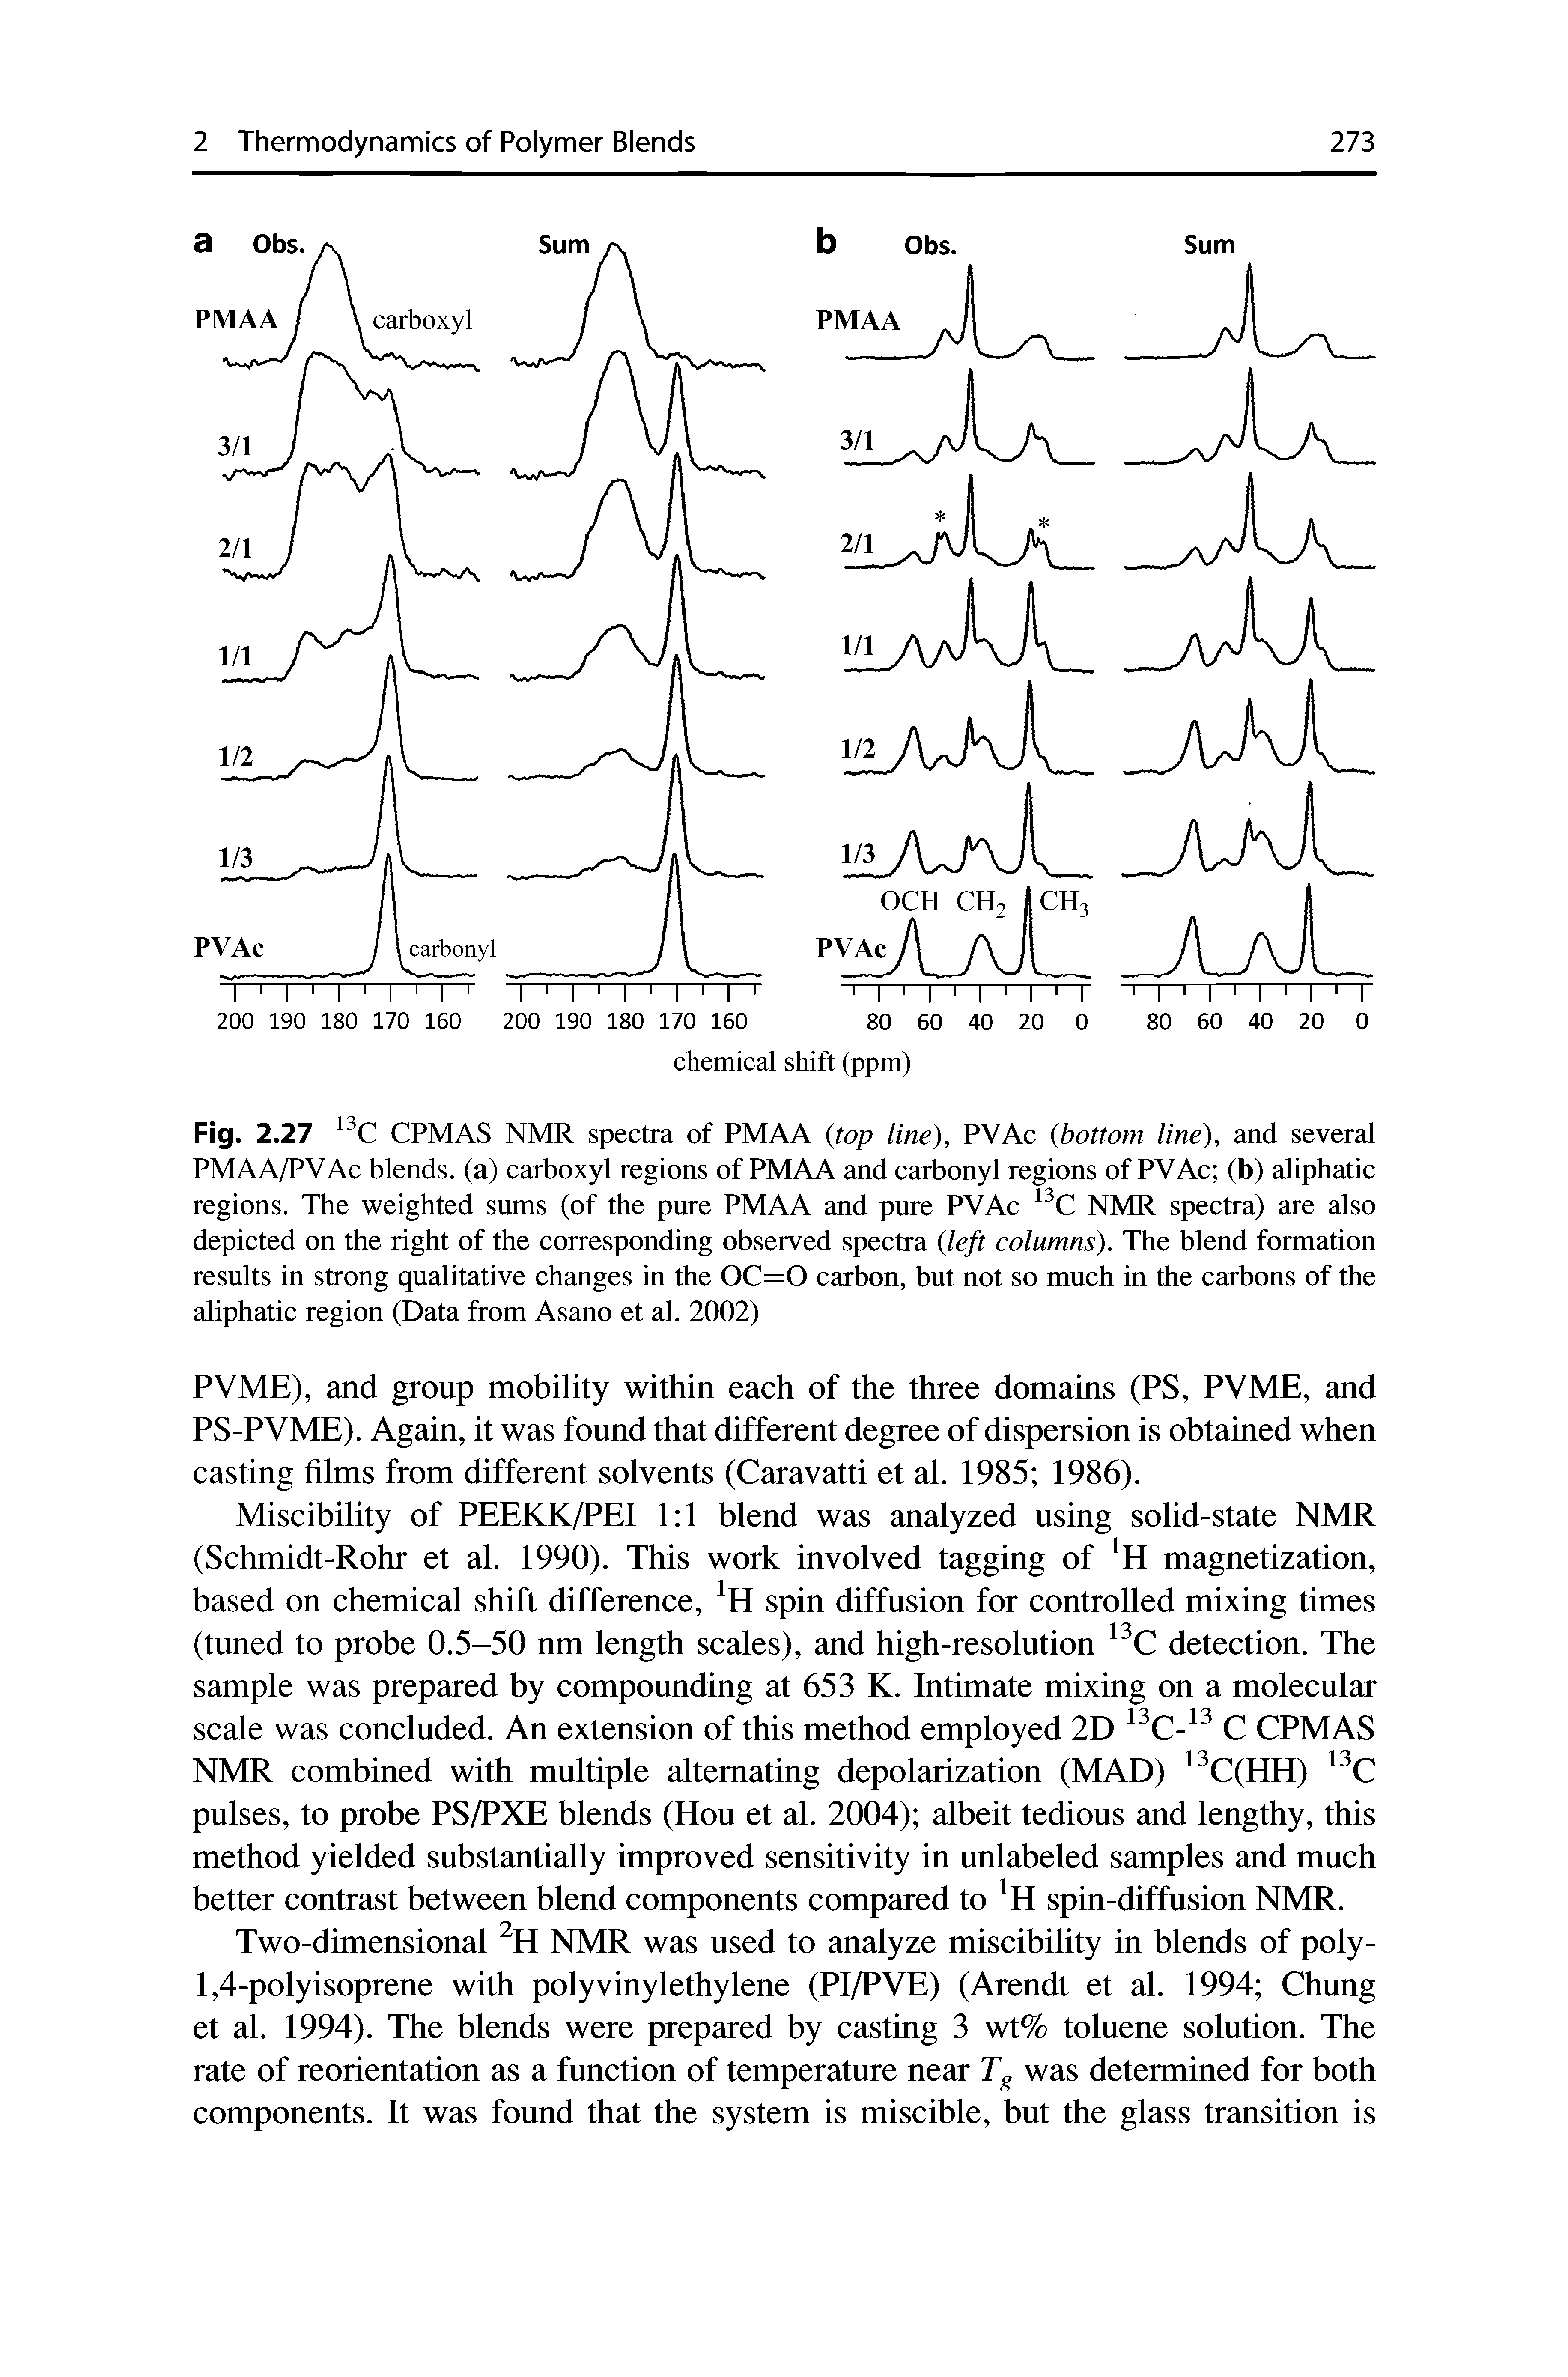 Fig. 2.27 CPMAS NMR spectra of PMAA top line), PVAc bottom line), and several PMAA/PVAc blends, (a) carboxyl regions of PMAA and carbonyl regions of PVAc (b) aliphatic regions. The weighted sums (of the pure PMAA and pure PVAc NMR spectra) are also depicted on the right of the corresponding observed spectra left columns). The blend formation results in strong qualitative changes in the OC=0 carbon, but not so much in the carbons of the aliphatic region (Data from Asano et al. 2002)...